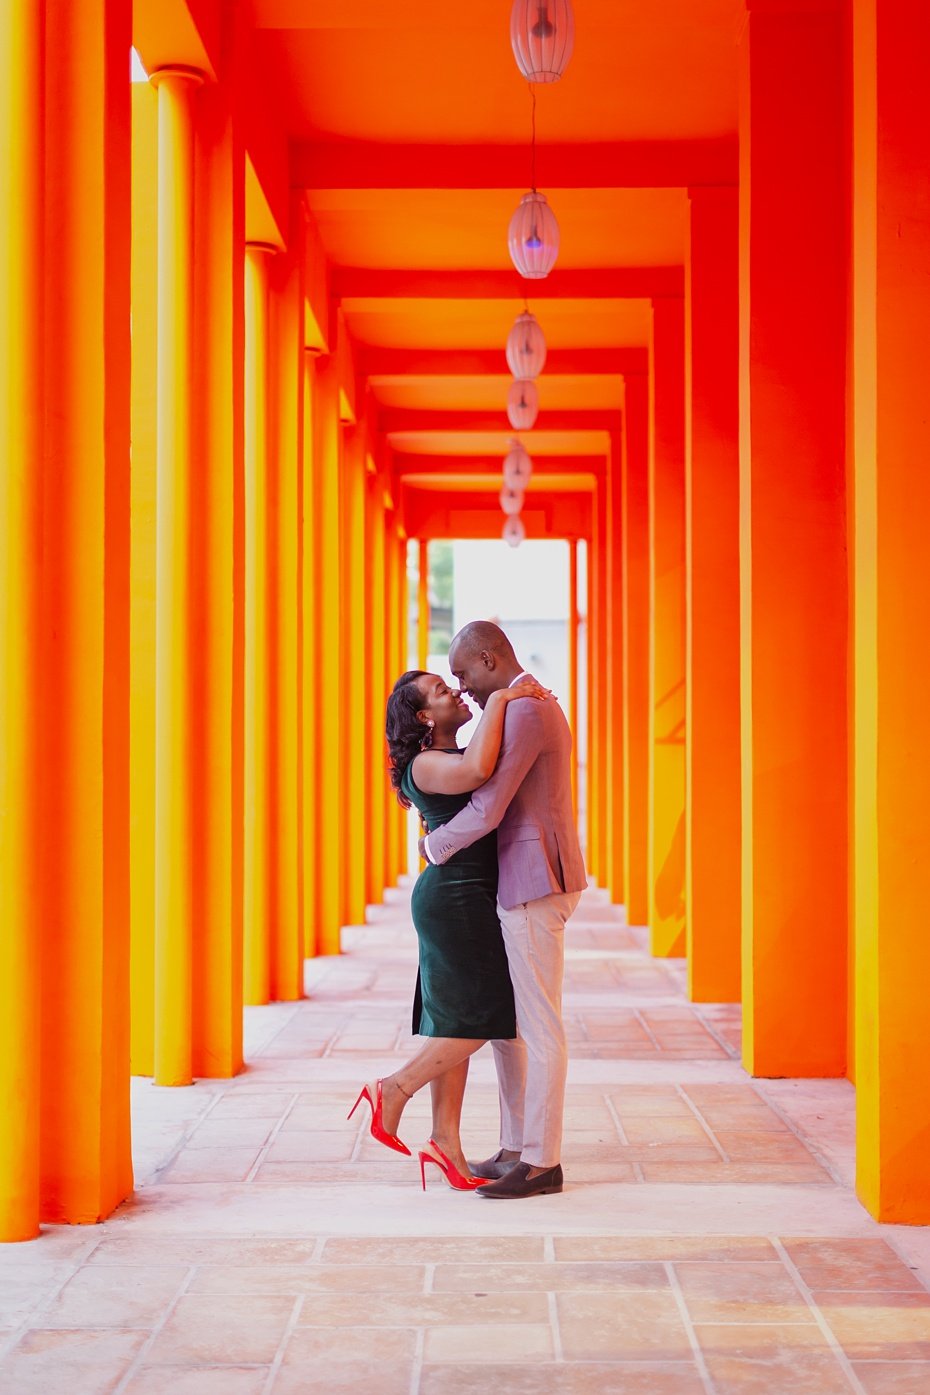 Choumate & Berthony Engagement Session at The Miami Design District -  Cortiella Photography